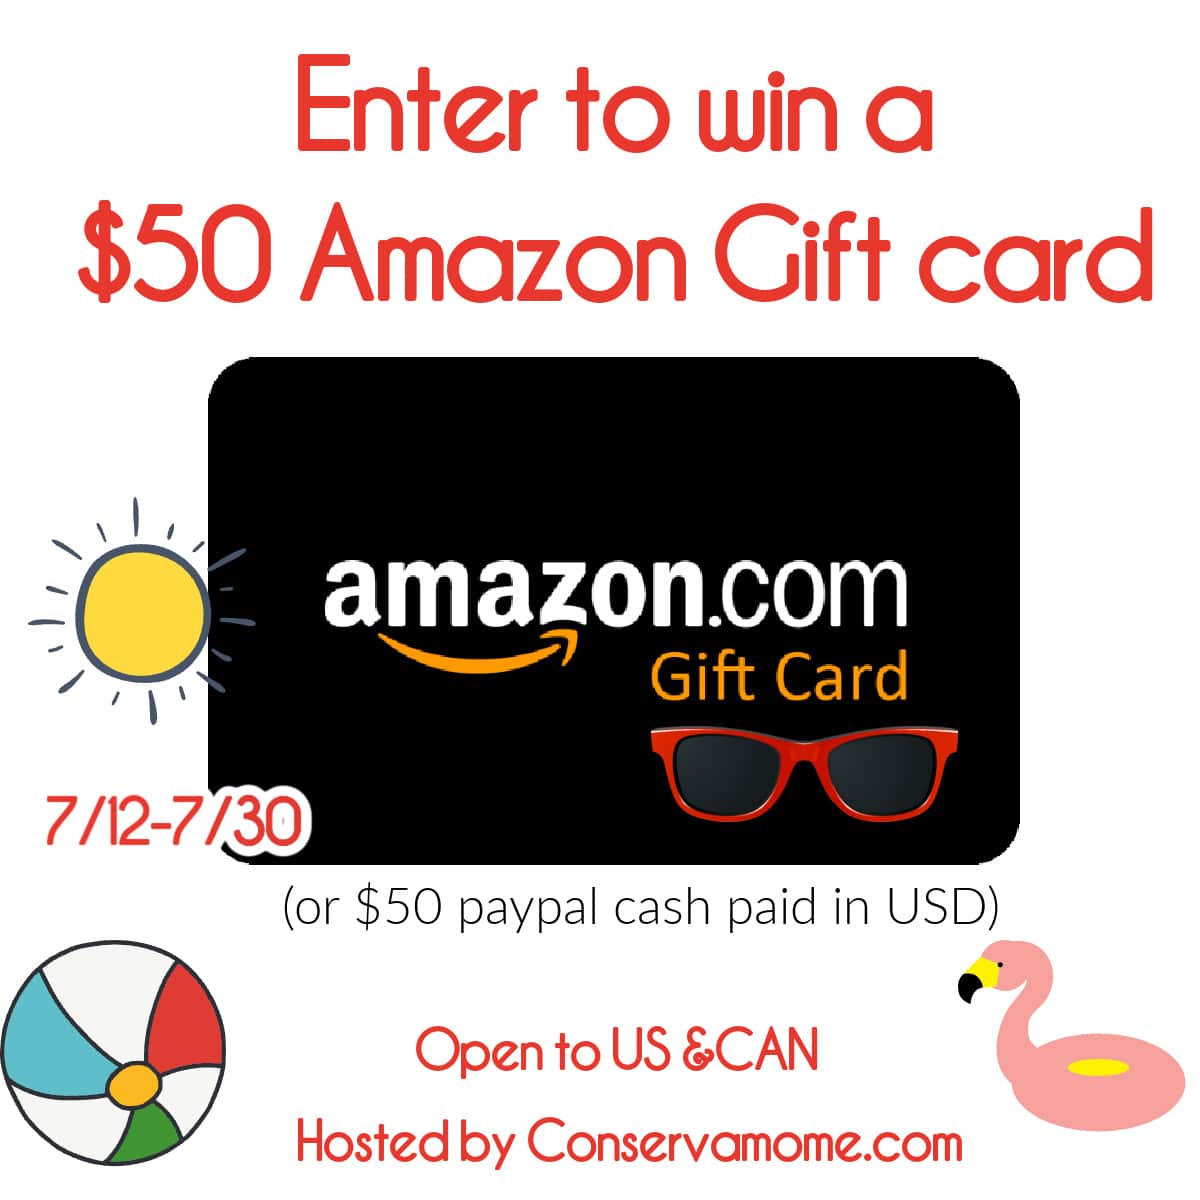 $50 Amazon Gift card (Or Paypal Cash) Giveaway